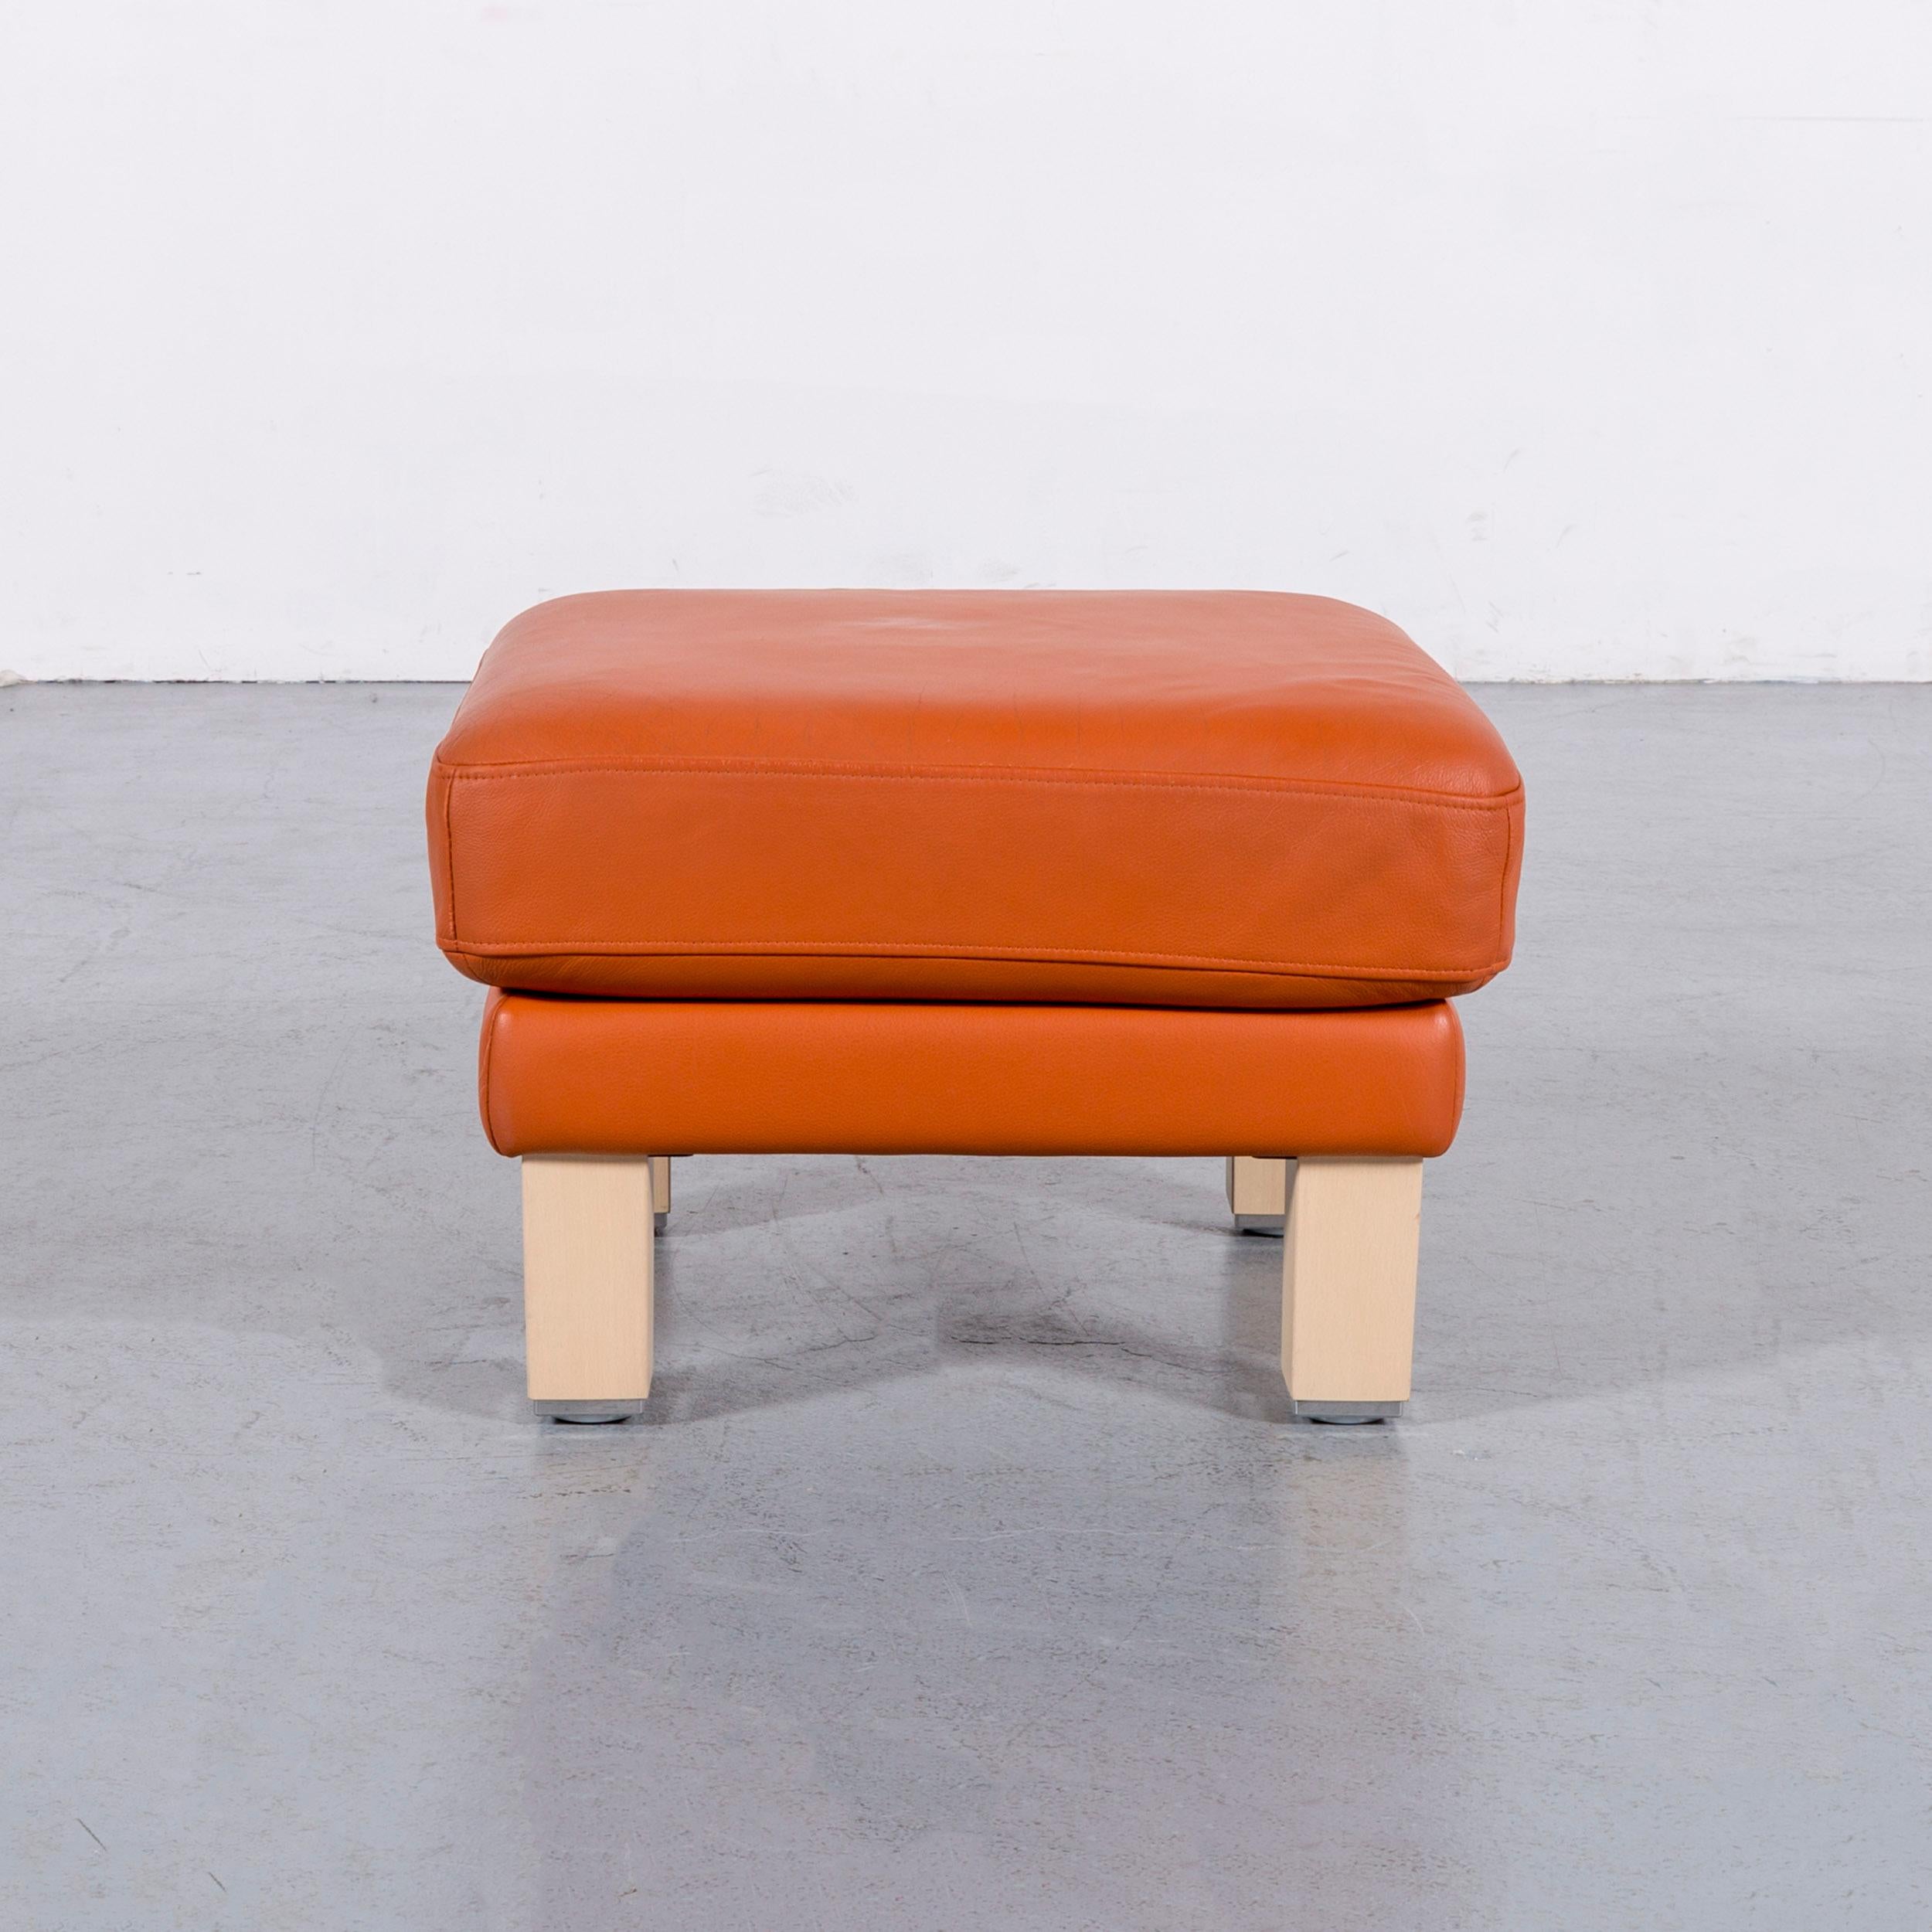 Contemporary Rolf Benz Leather Foot-Stool Orange Bench For Sale